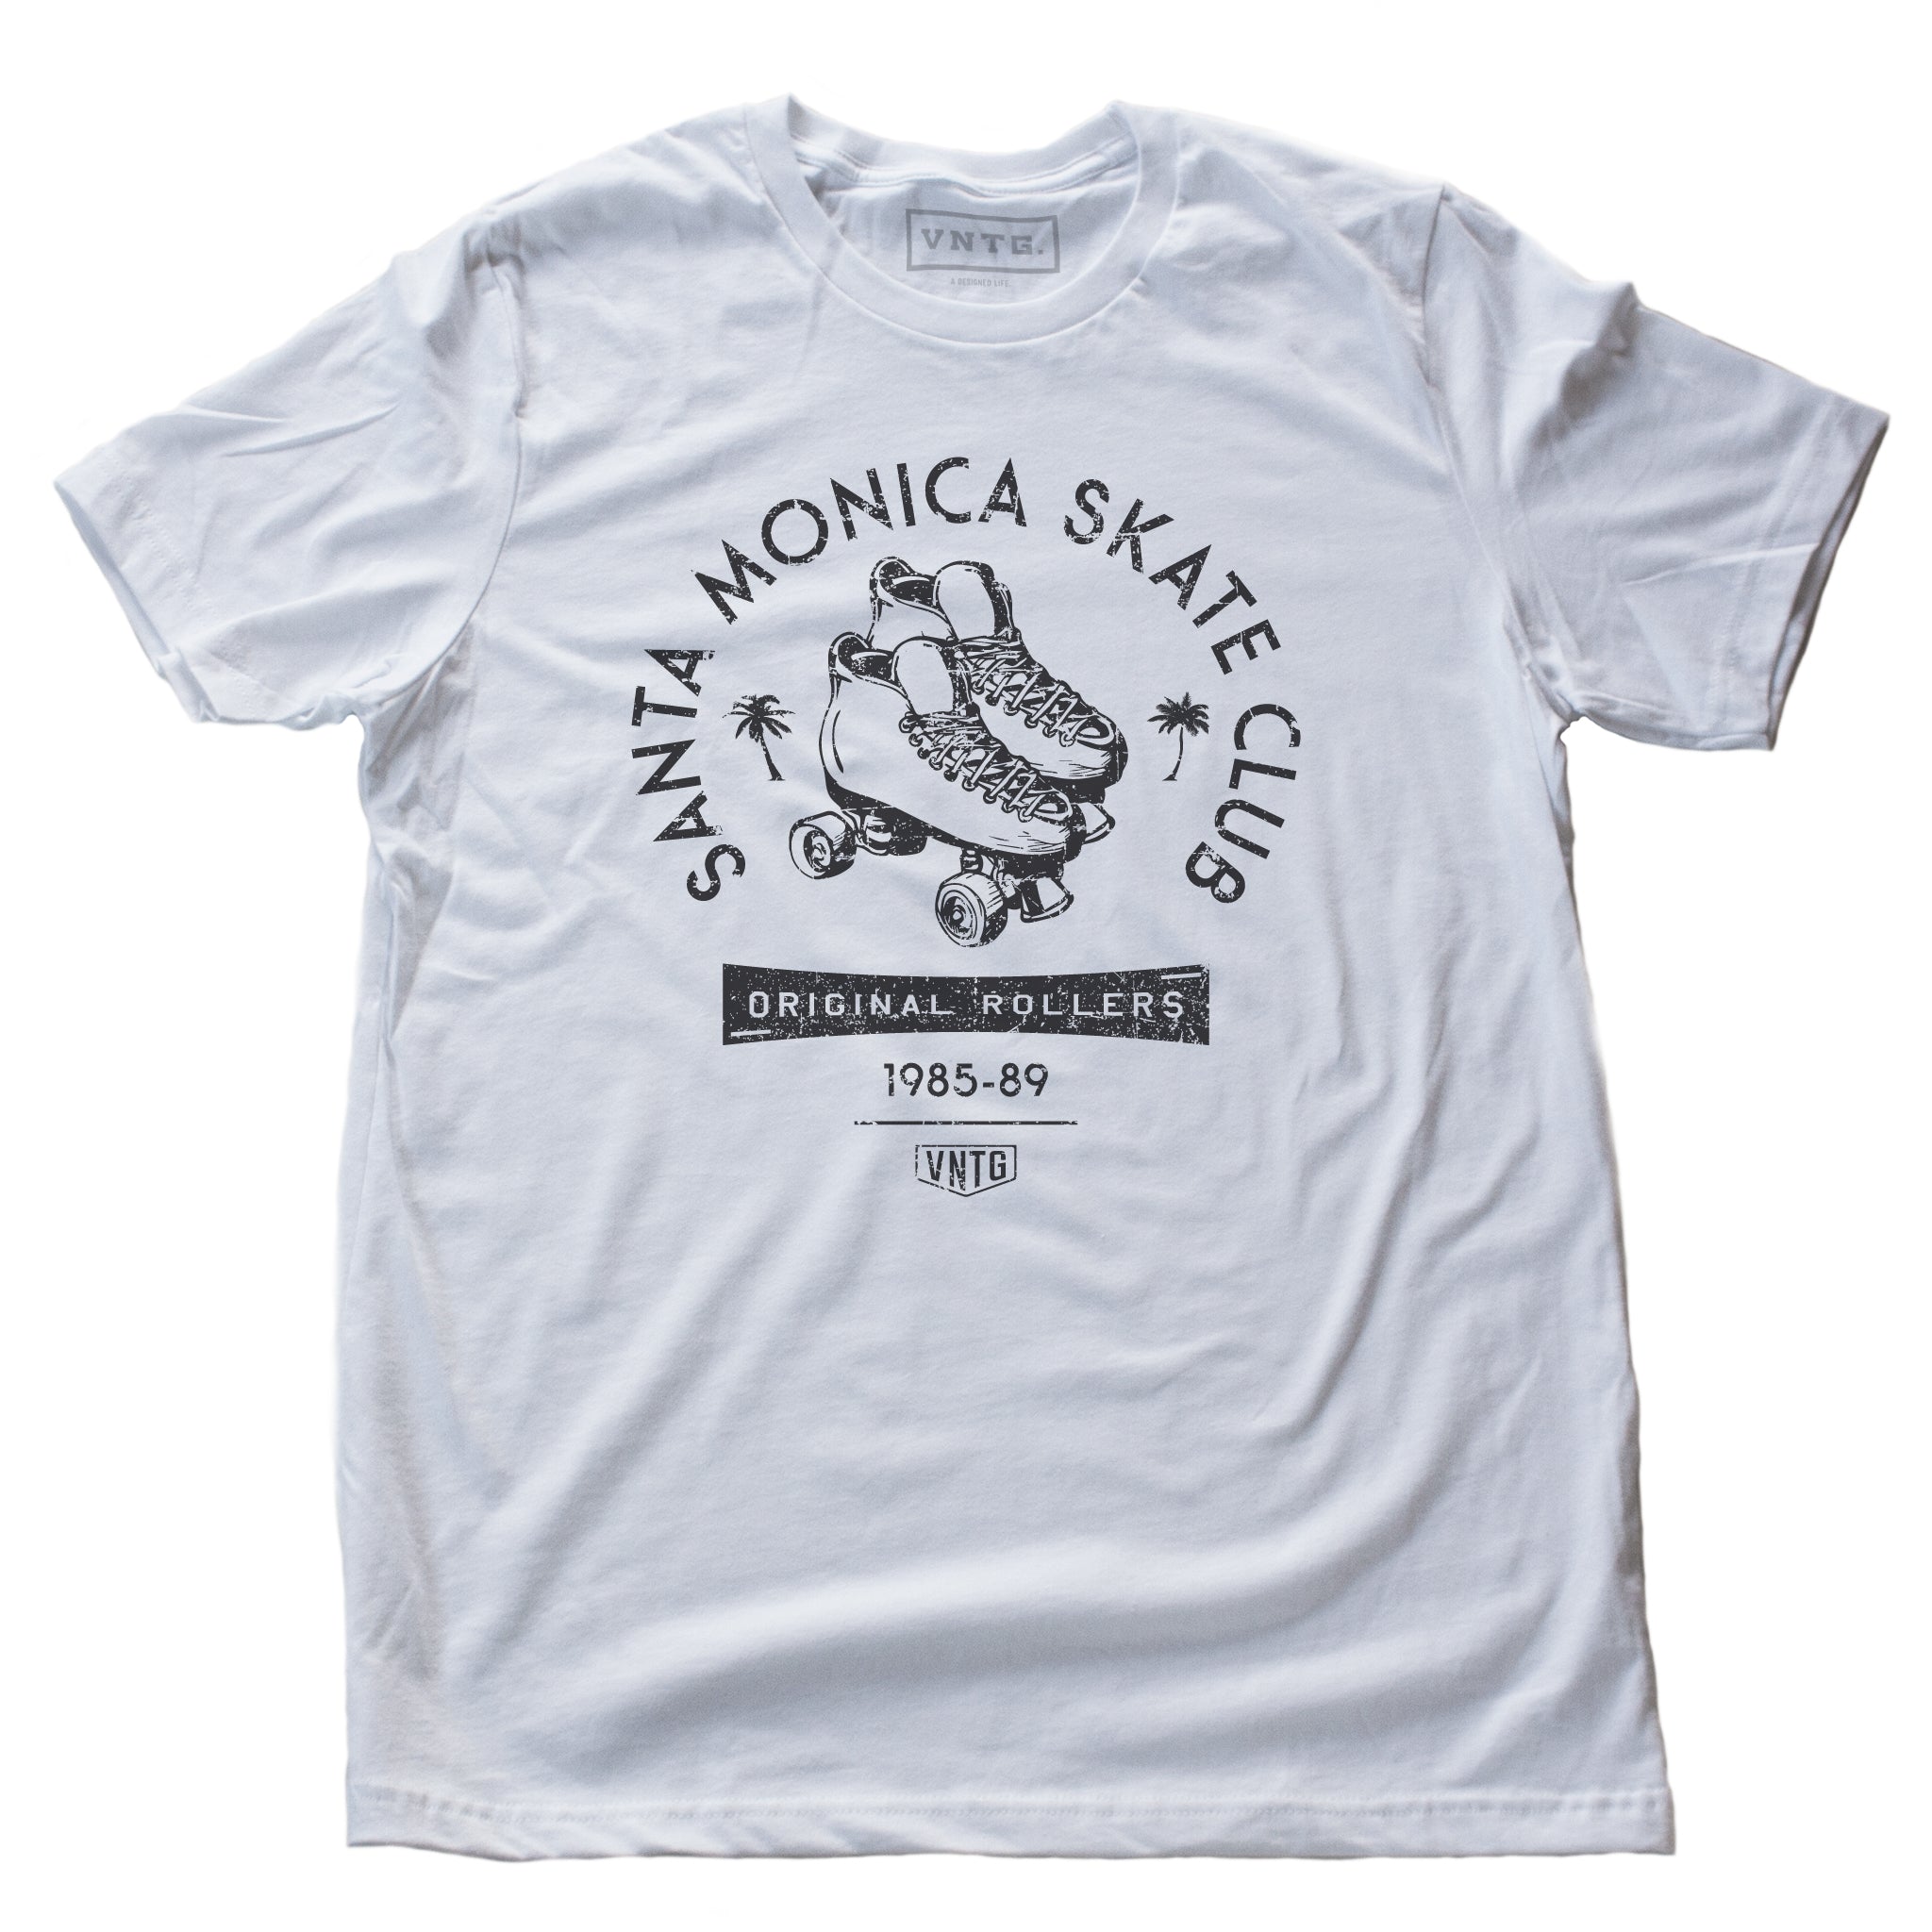 A vintage-inspired retro t-shirt in White for the fictitious Santa Monica Skate Club, “original rollers 1985-89” featuring a pair of quad roller skates and palm trees. By fashion brand VNTG. for Wolfsaint.net